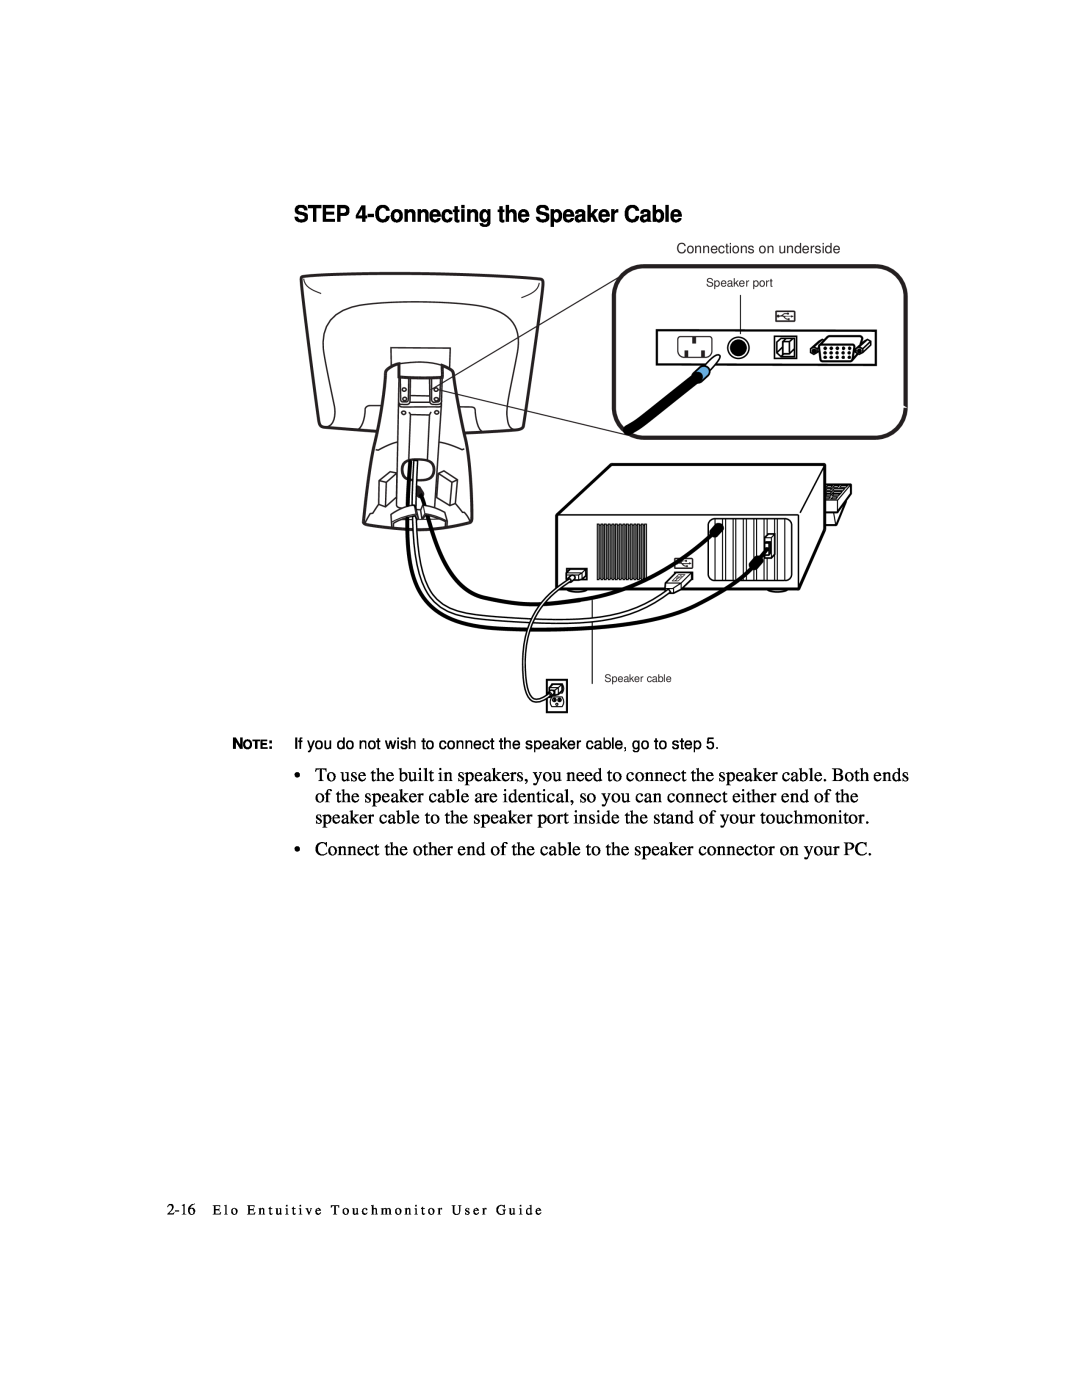 Elo TouchSystems 1525L manual Connecting the Speaker Cable 